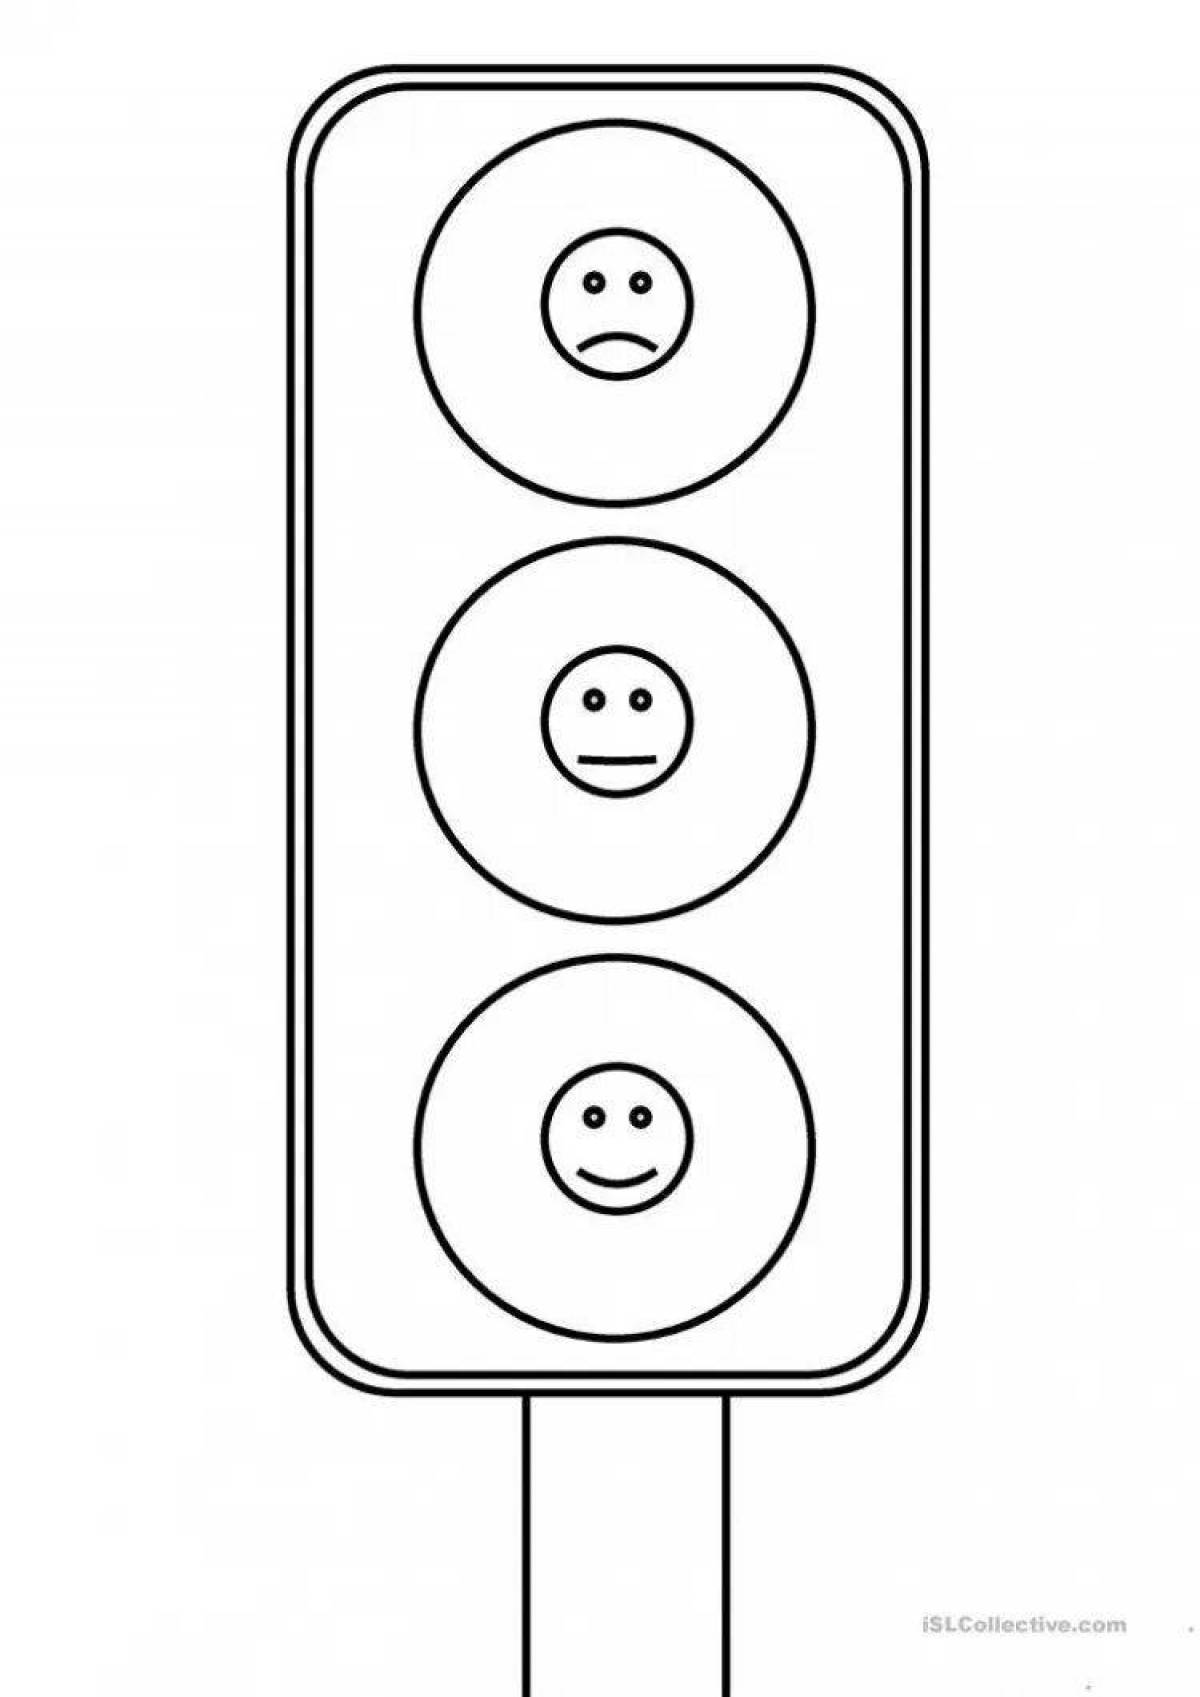 Animated drawing of a traffic light